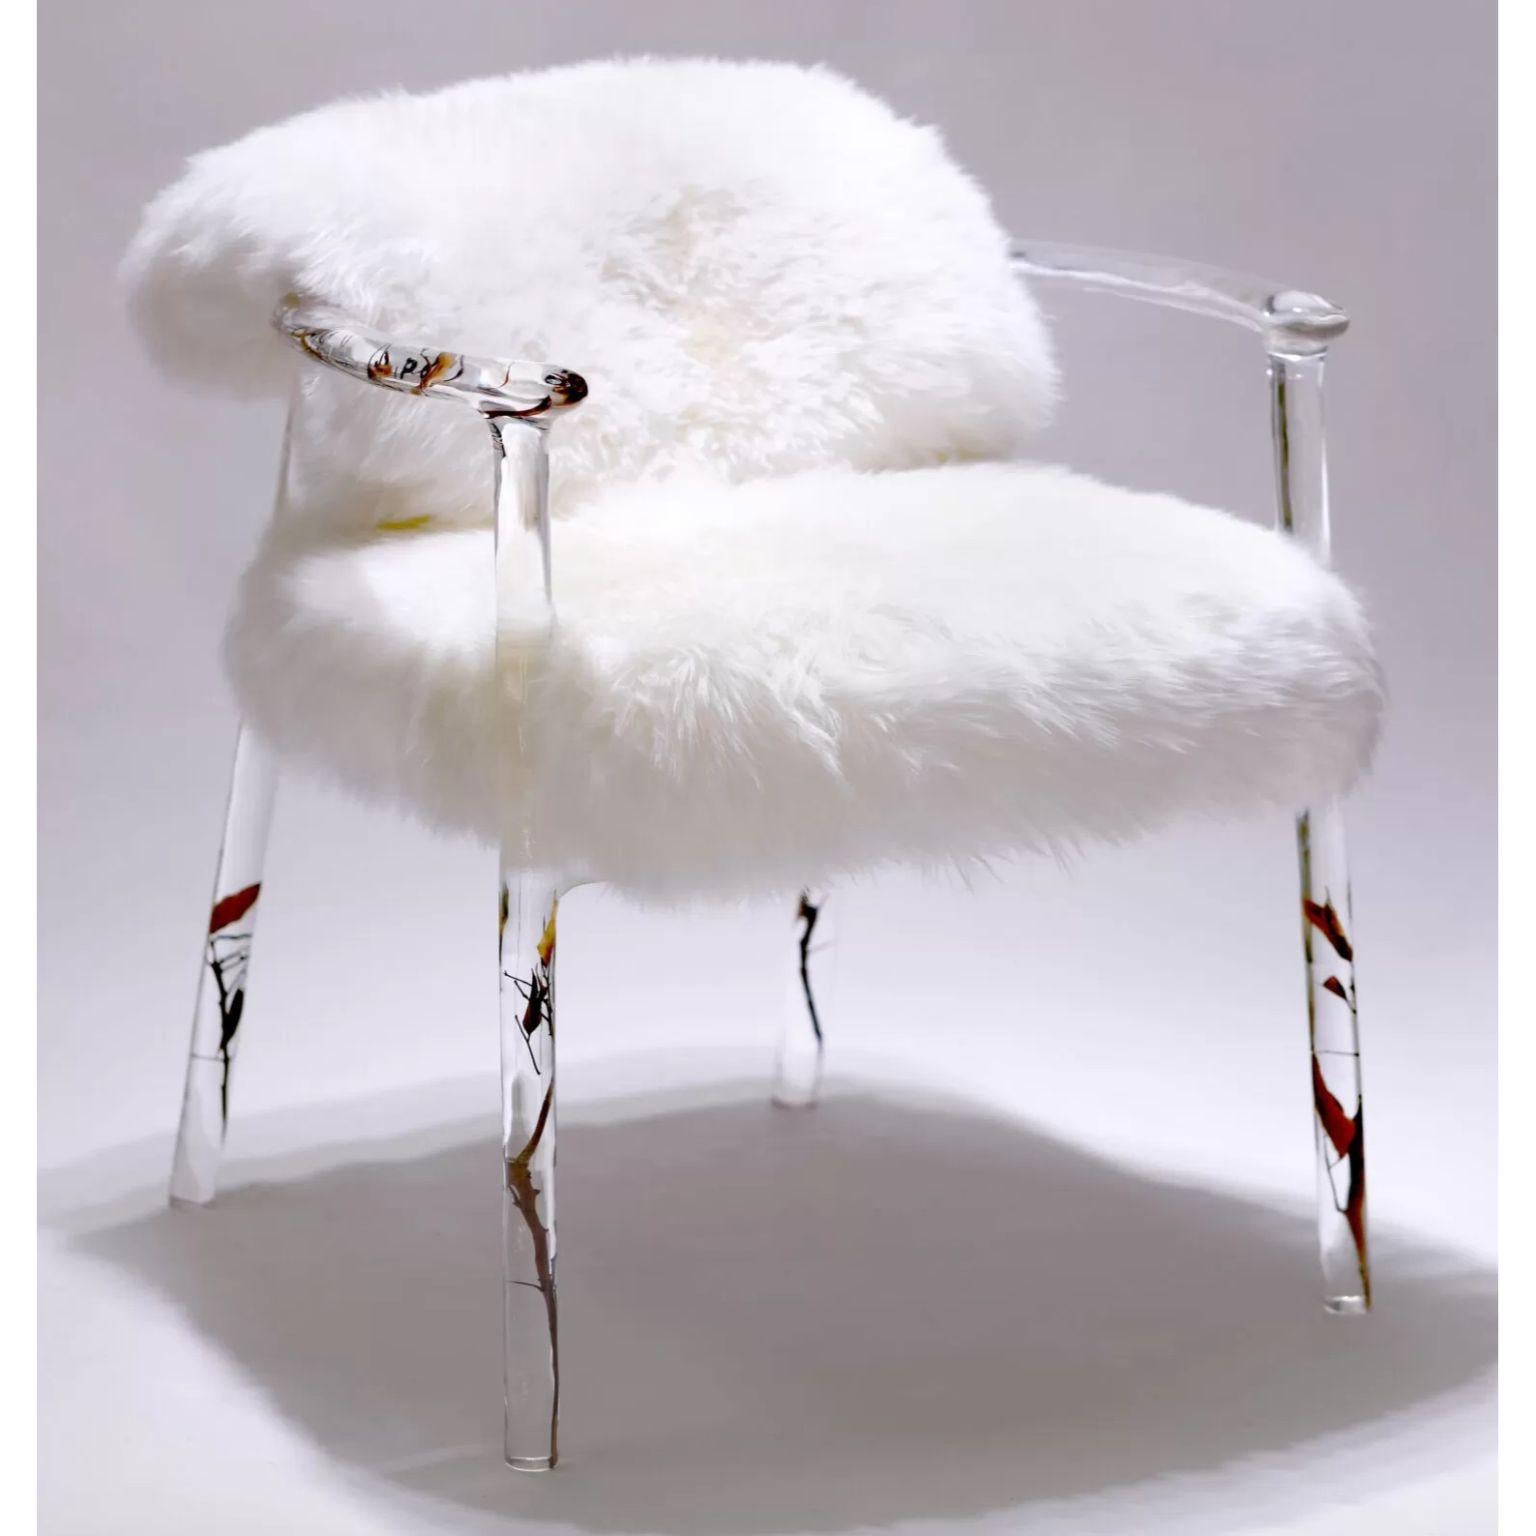 Branched Crystal Chieftain Chair by Dainte
Dimensions: D 50 x W 65 x H 64 cm.
Materials: Crystal, twigs and sheepskin.

A thought-provoking and timeless addition to any style of interior that will bring you closer to nature in a truly inspired way.